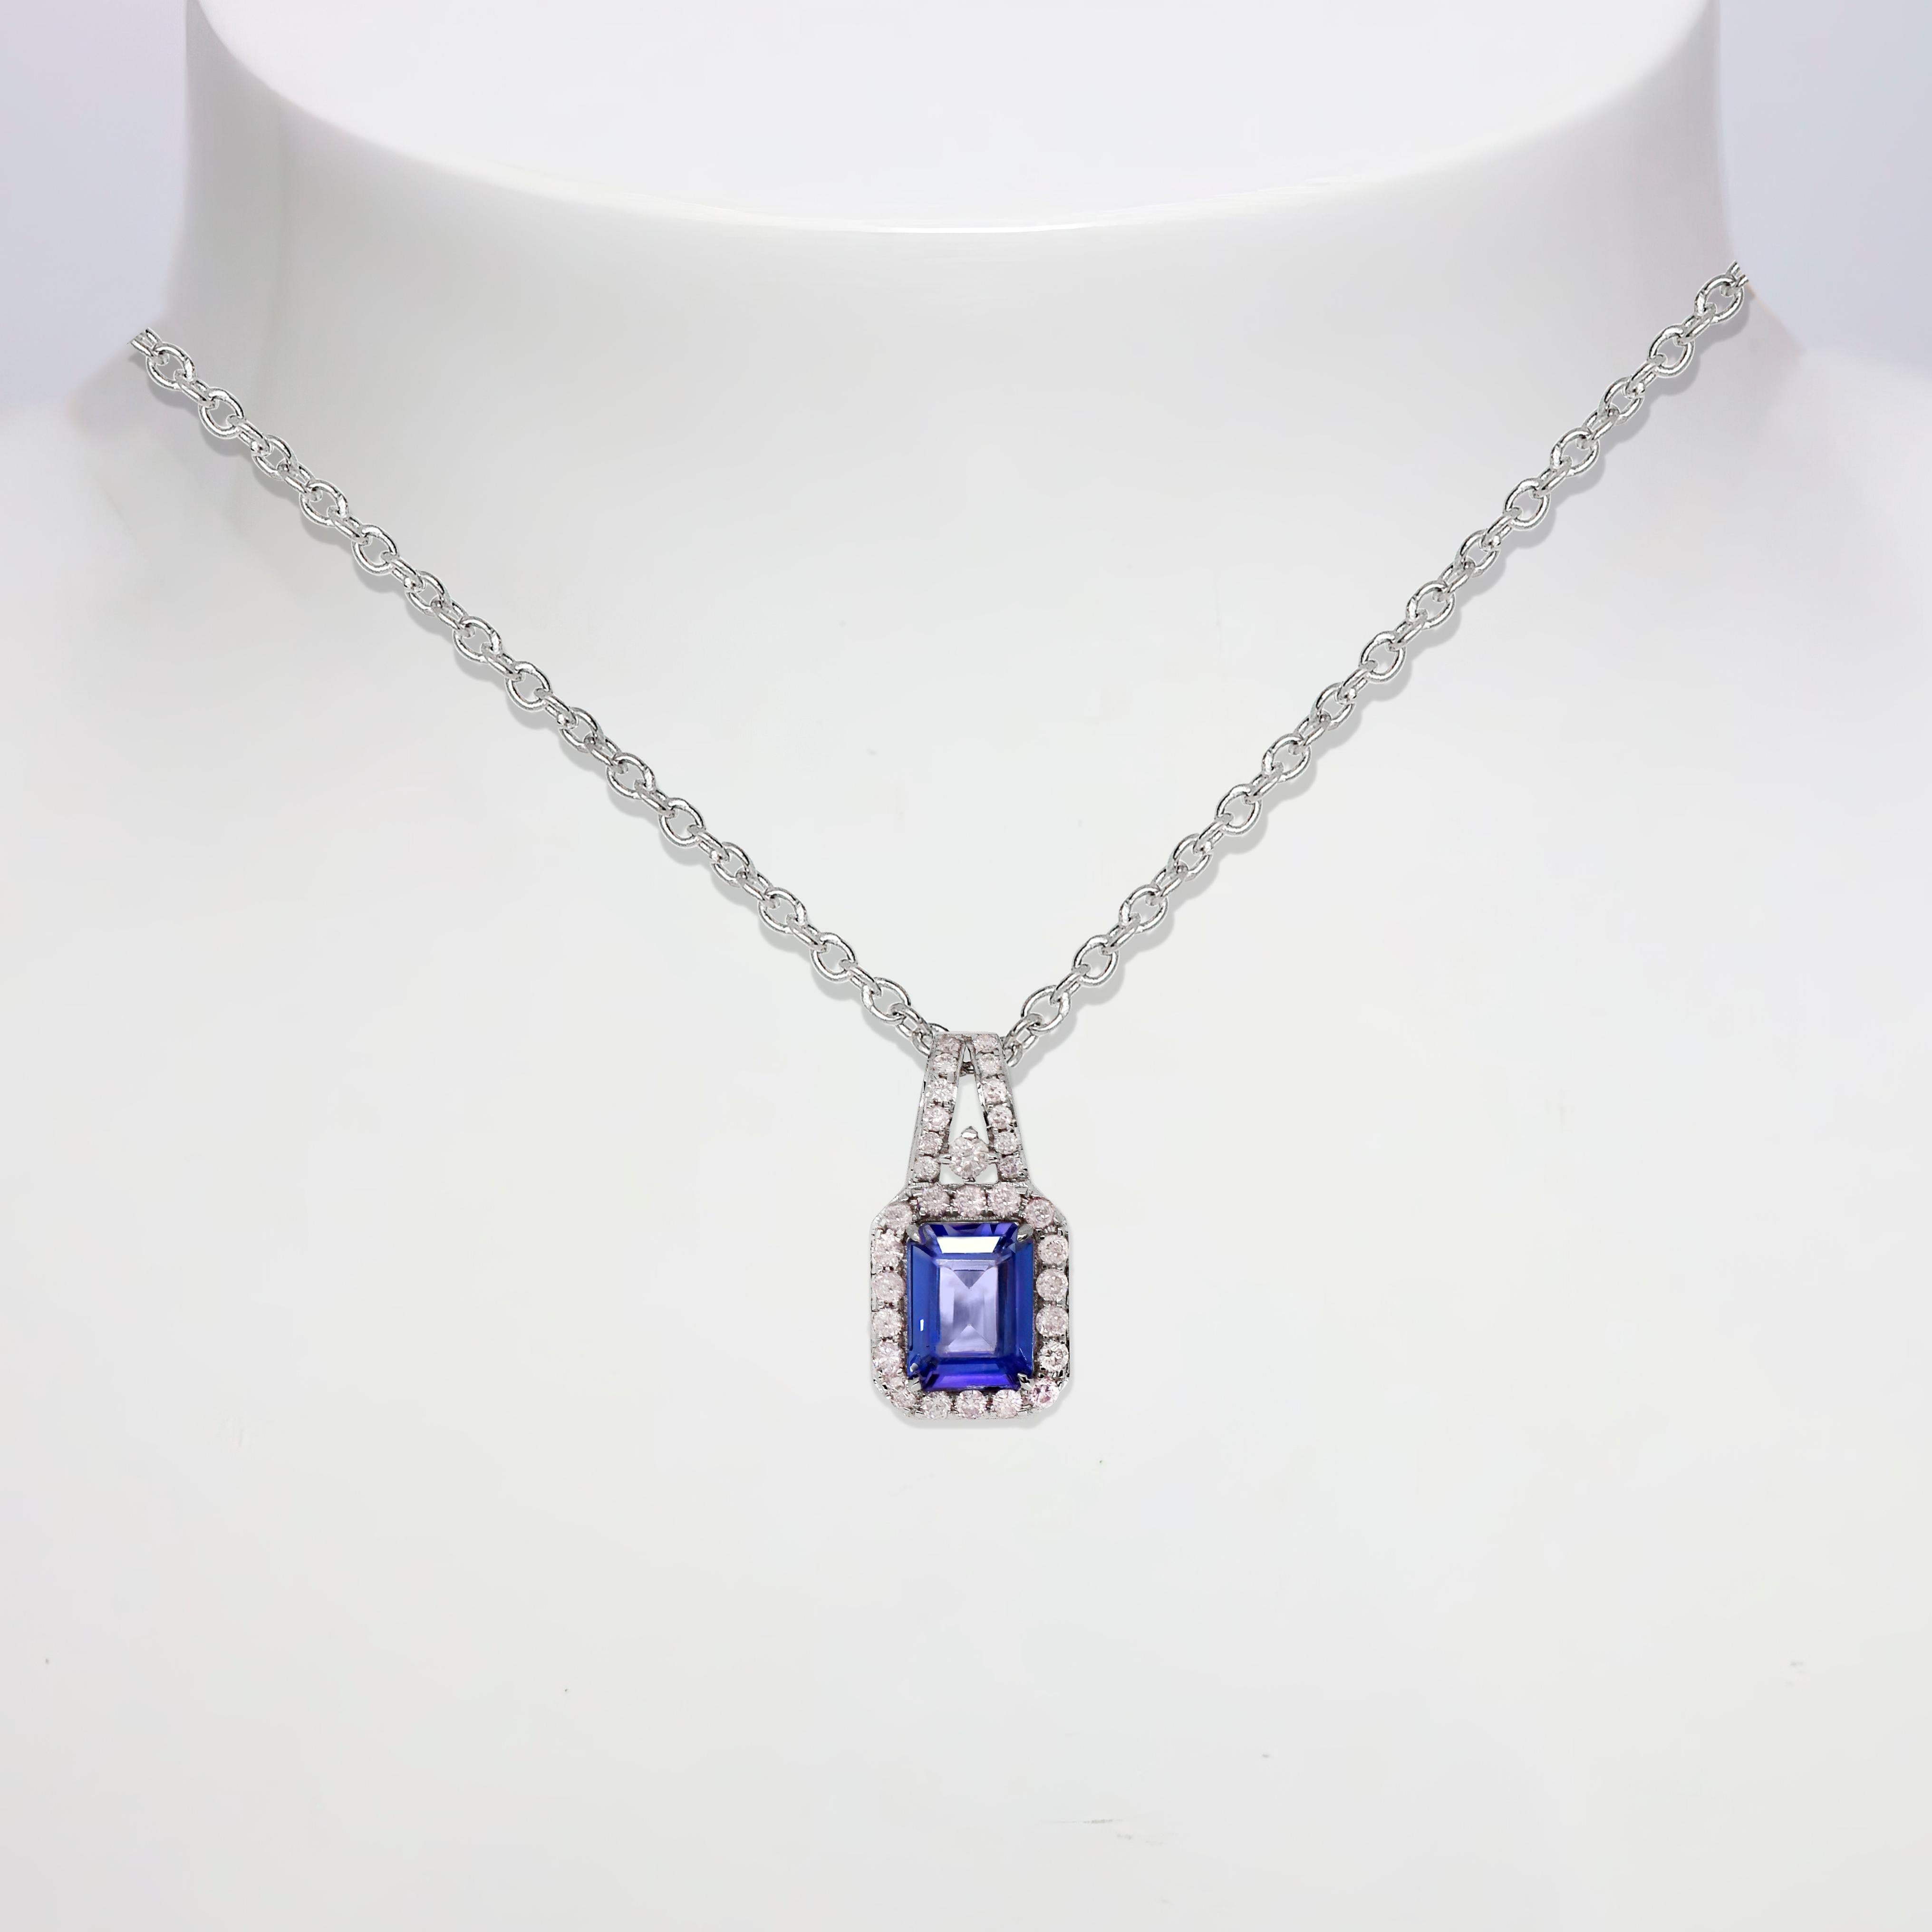 *IGI 14K 1.57 ct Tanzanite&Pink Diamond Antique Pendant Necklace*
The natural bluish violet tanzanite, weighing 1.57 ct, is the center stone surrounded by natural pink diamonds weighing 0.41 ct on the 14K white gold halo design band.

The classic